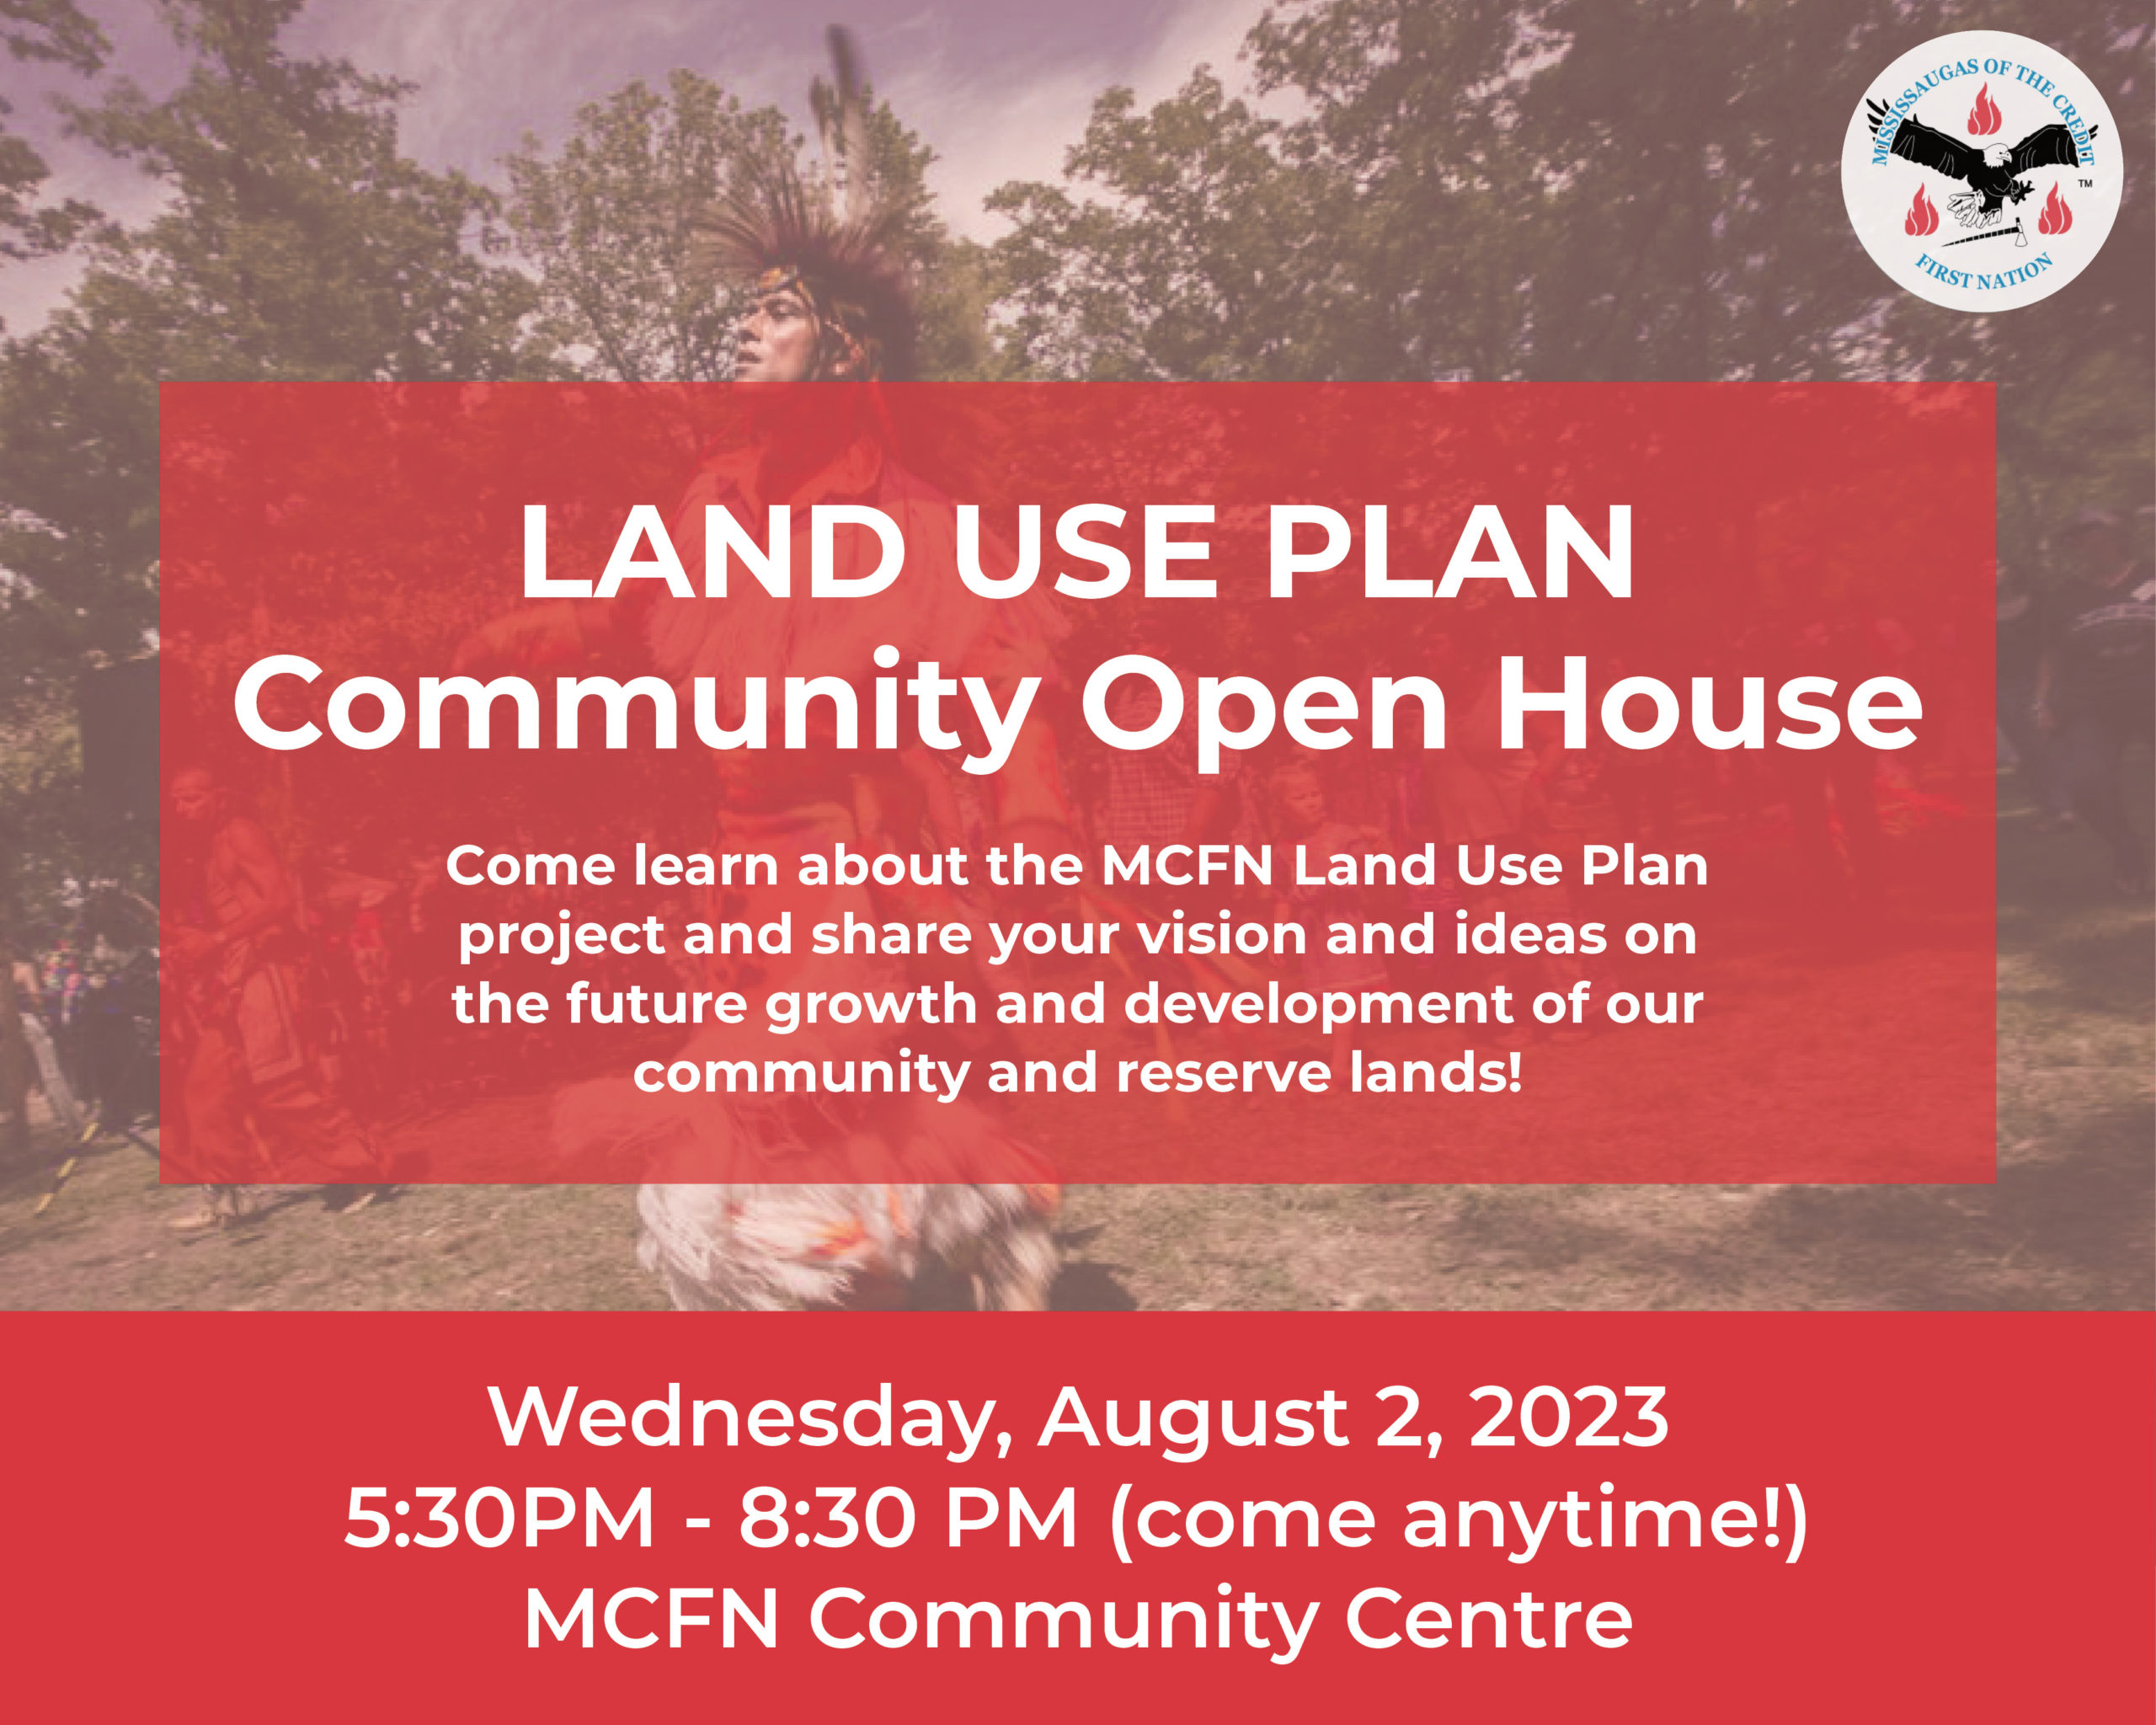 MCFN Land Use Project update